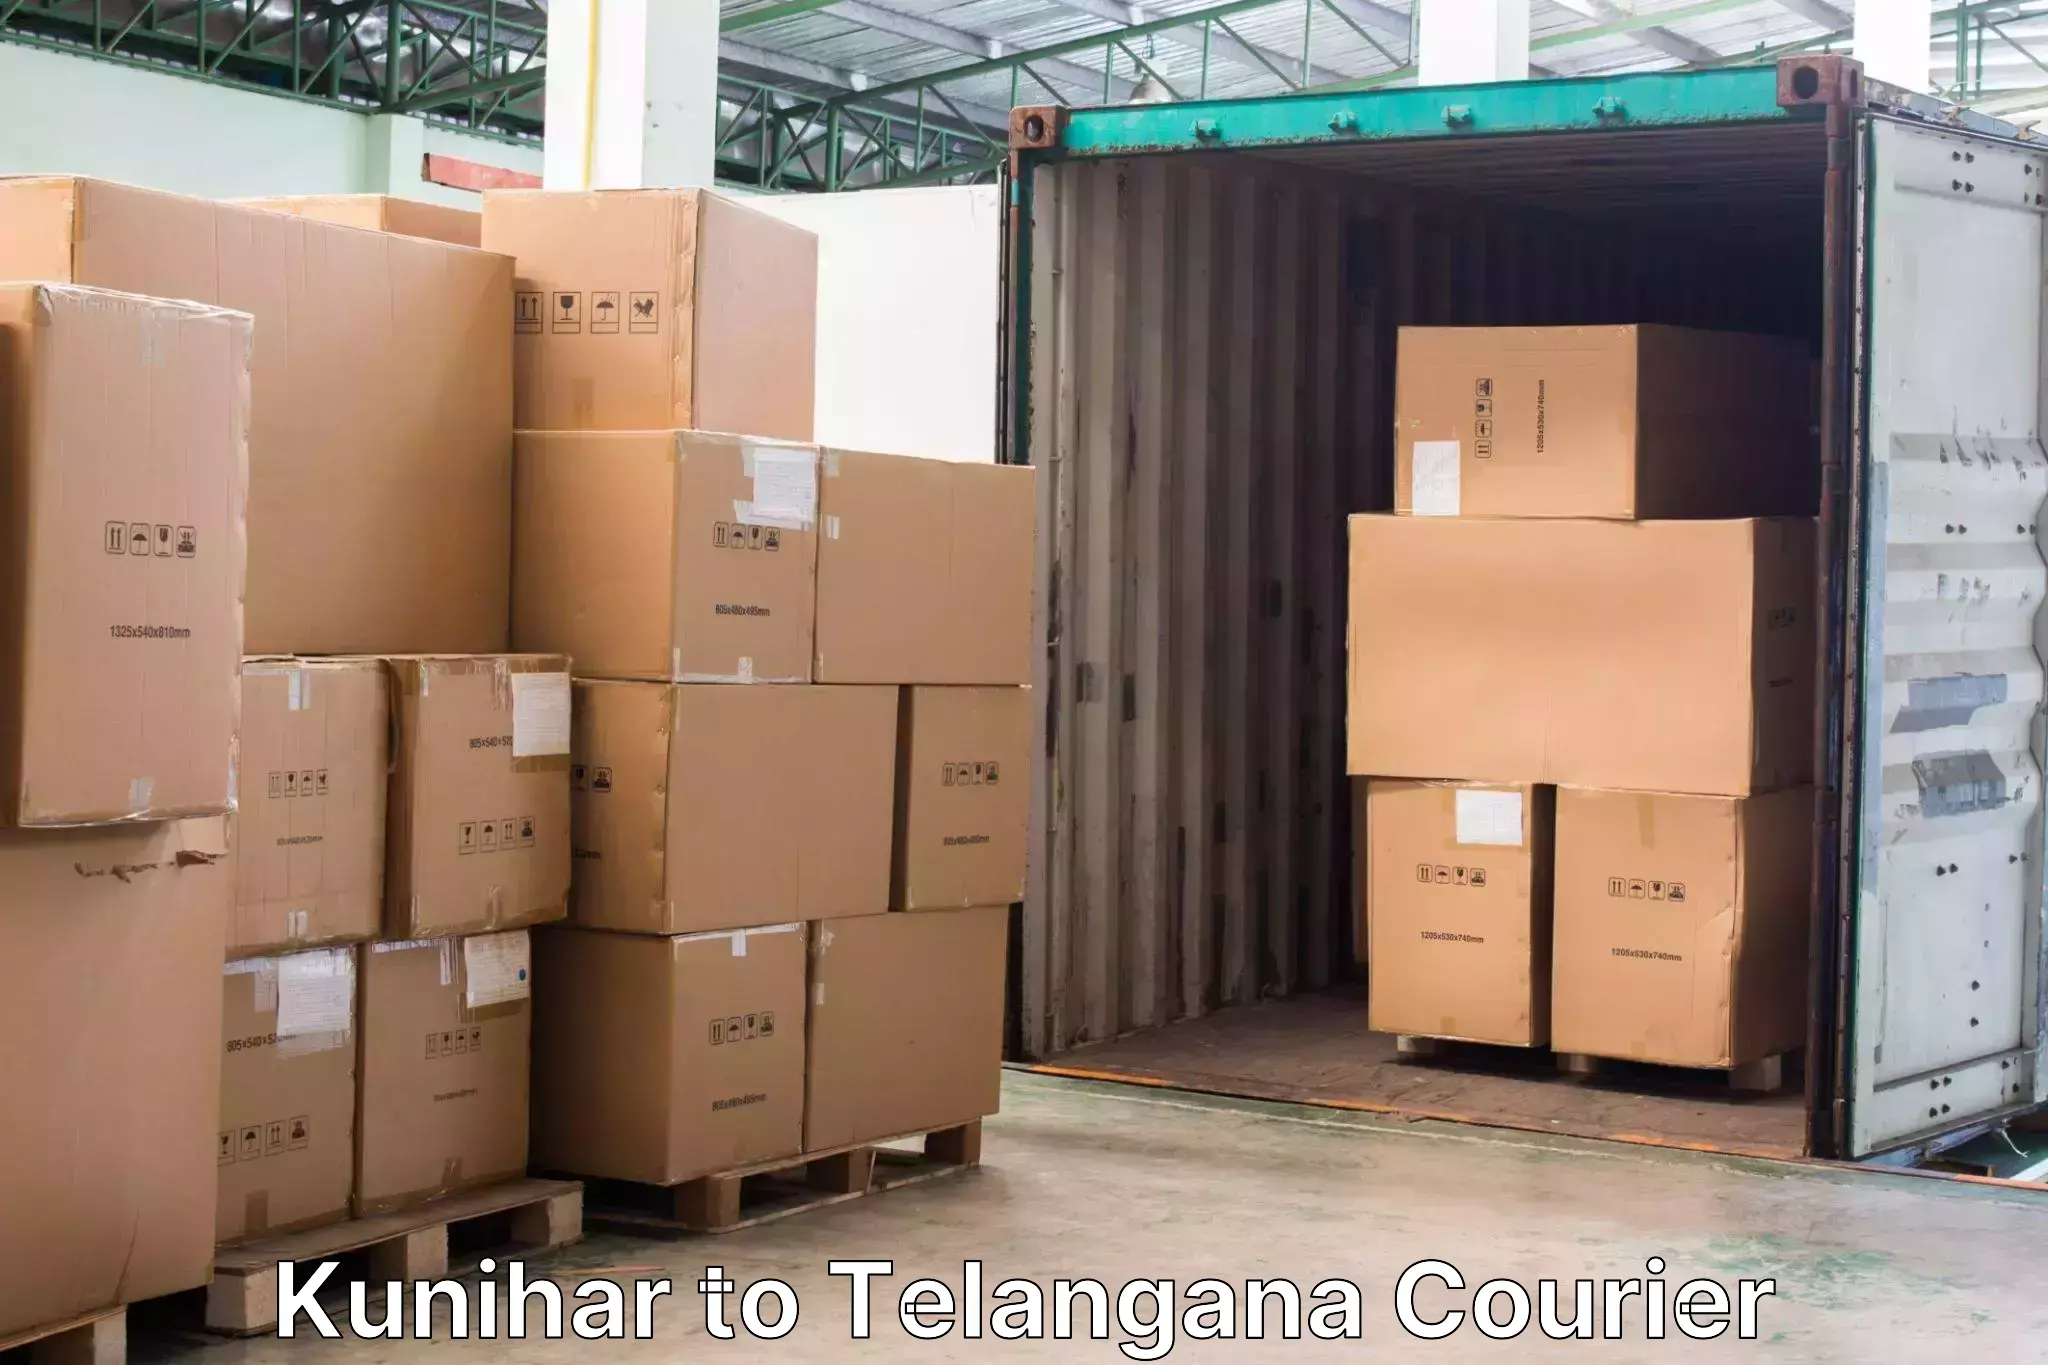 Luggage storage and delivery in Kunihar to Patancheru